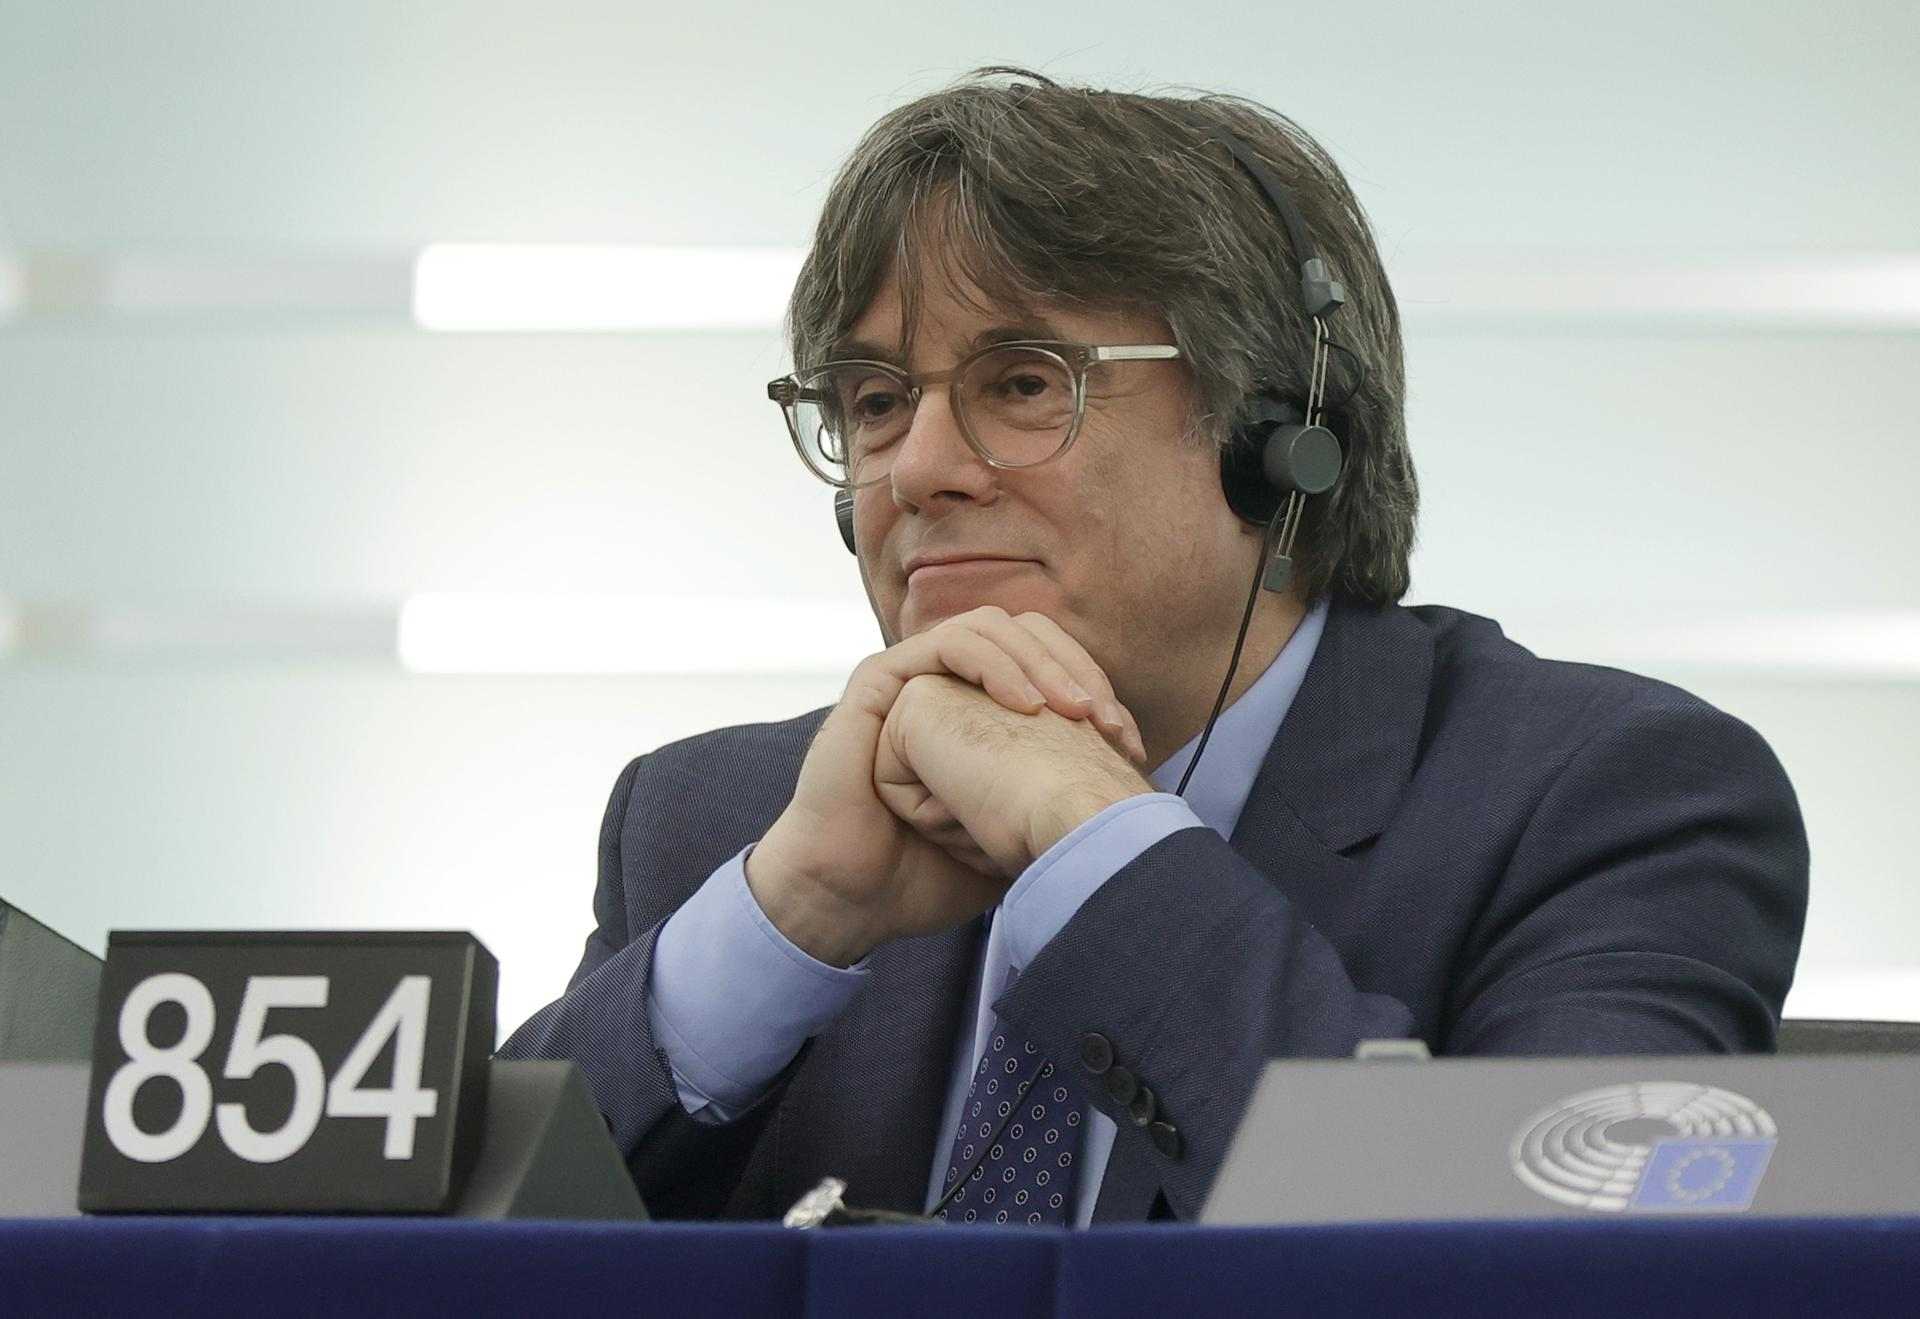 Puigdemont denounces the criminal plot of Operation Catalonia: "They will have to respond"